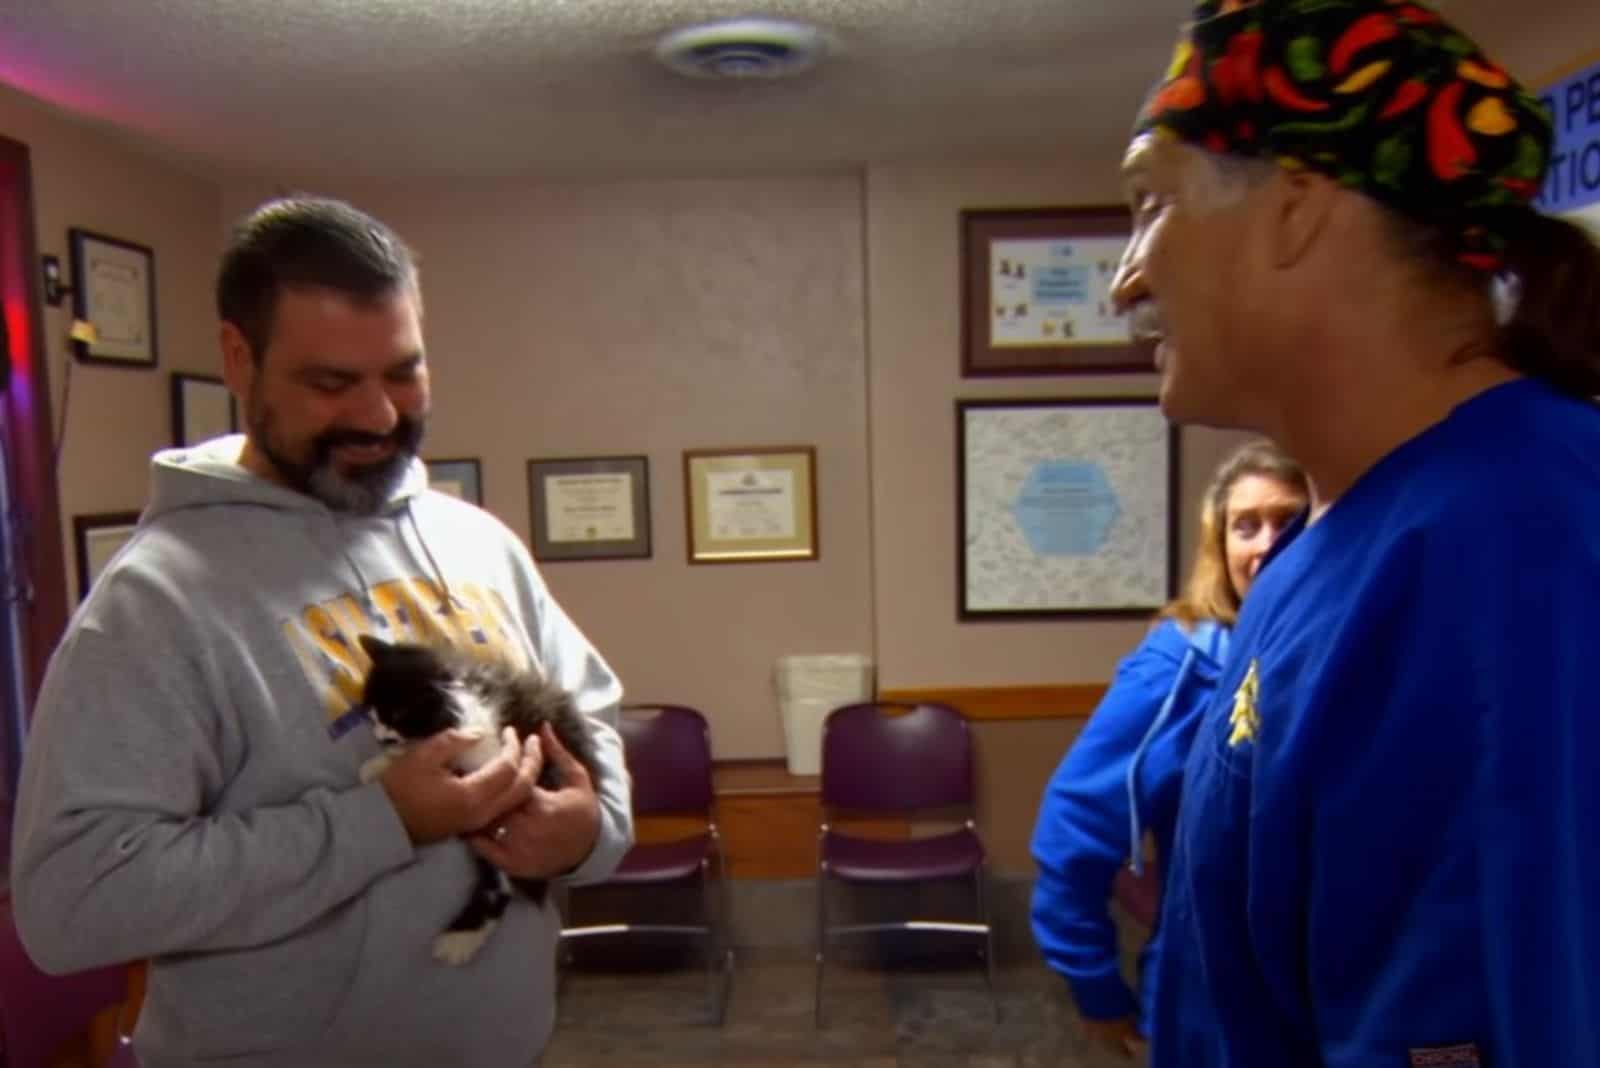 a man took a kitten from a veterinary station